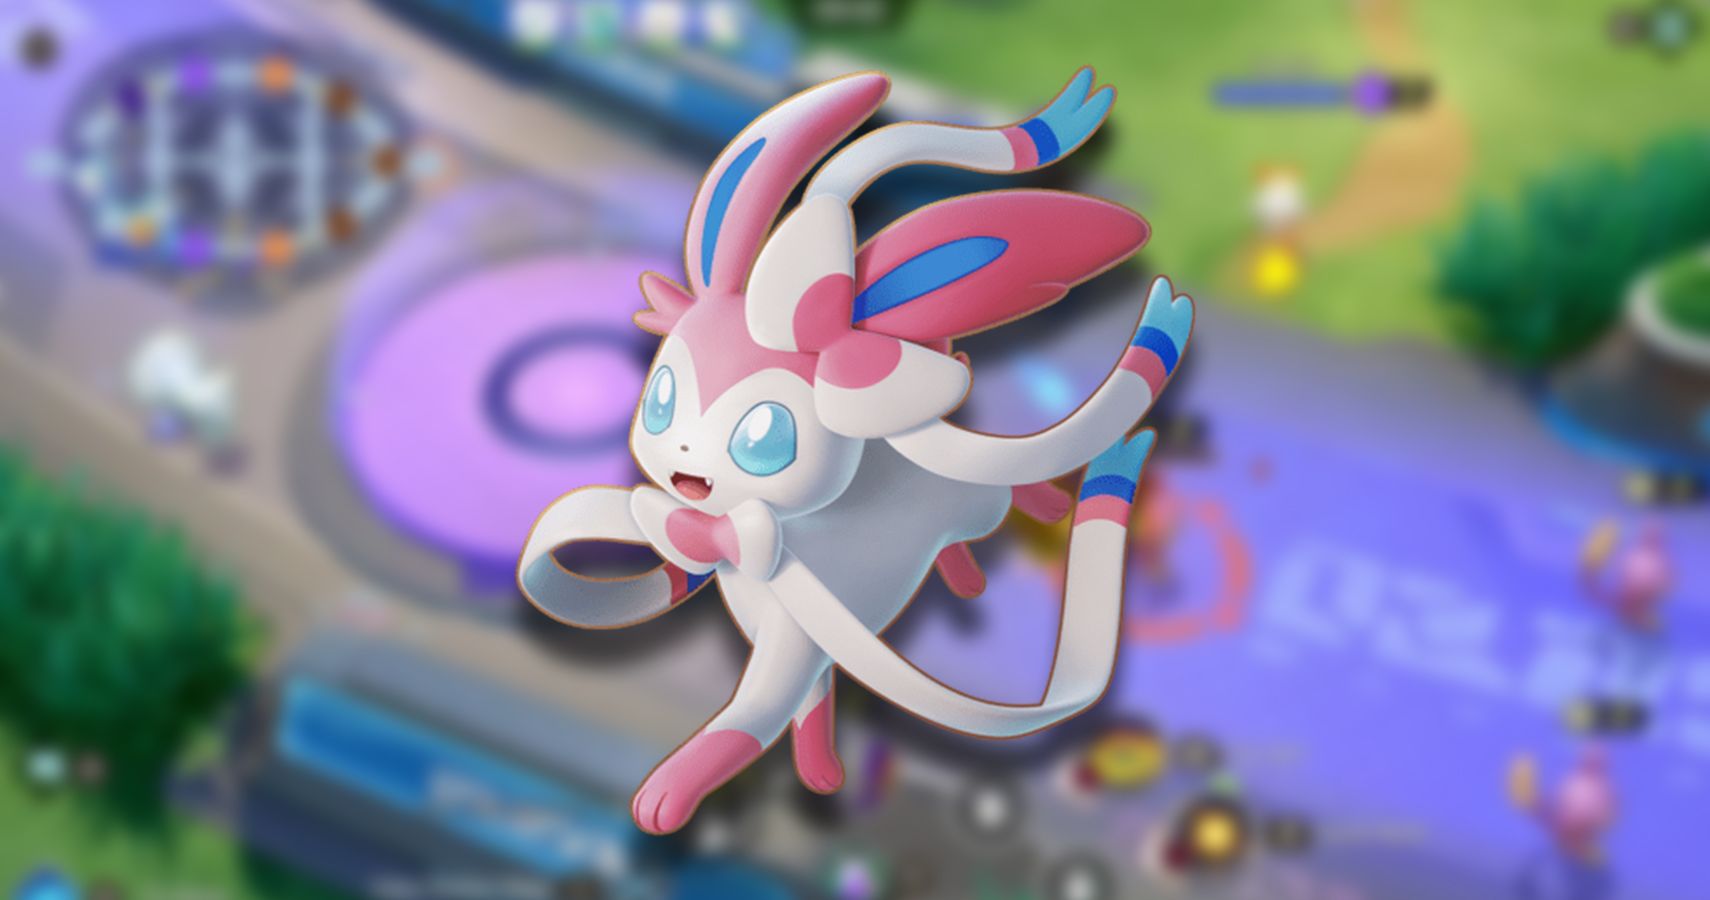 Sylveon Is Getting Nerfed In Pokemon Unite